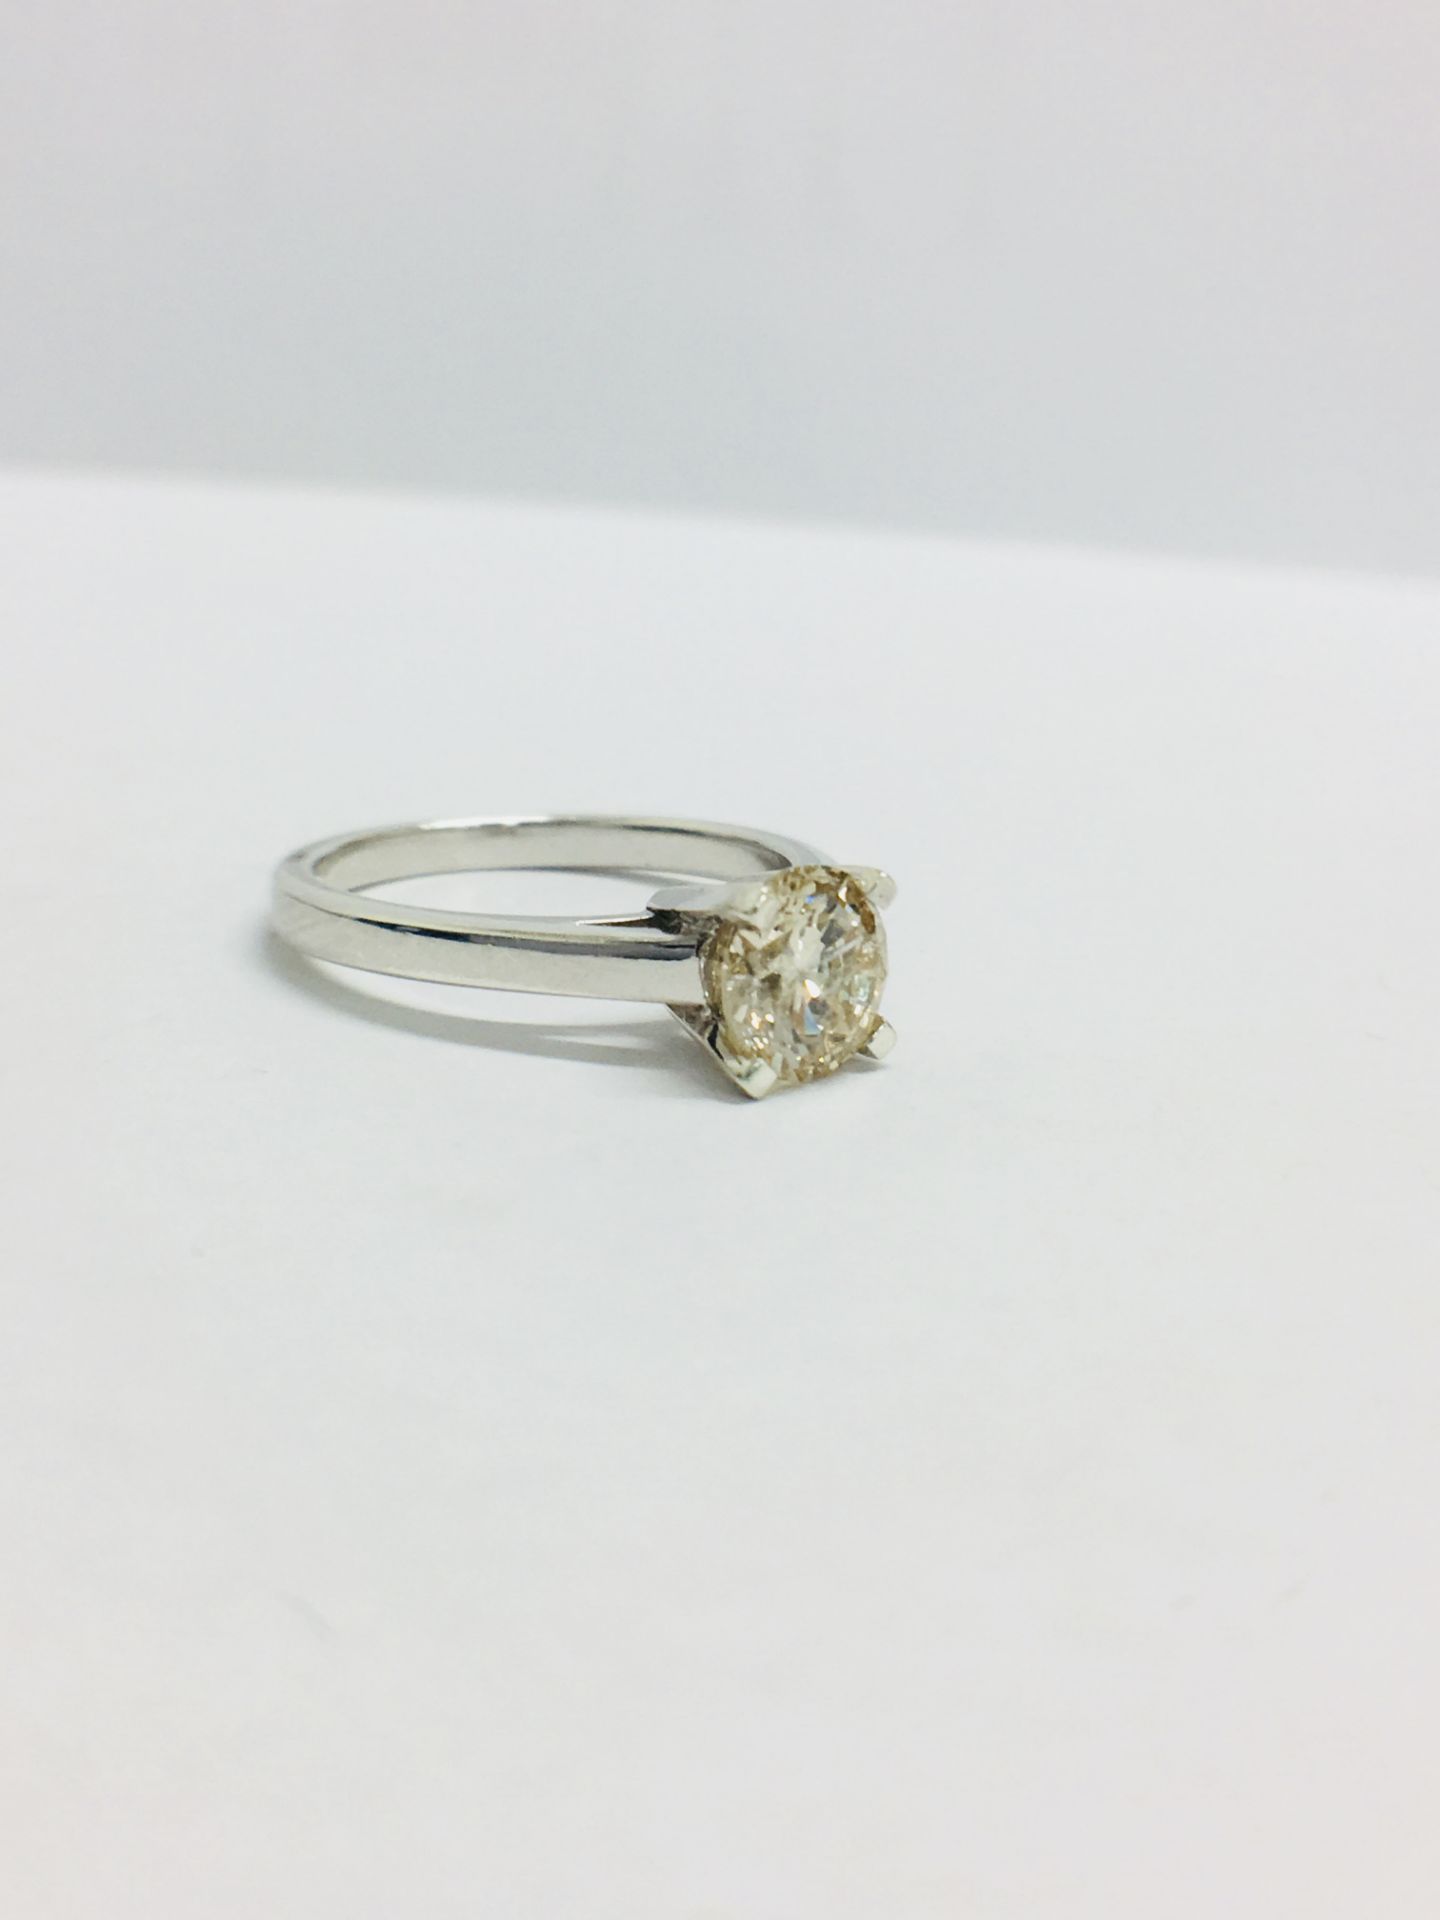 1.00ct diamond solitaire ring set in platinum. IKcolour and I1 clarity. 4 claw setting, size M. - Image 11 of 13